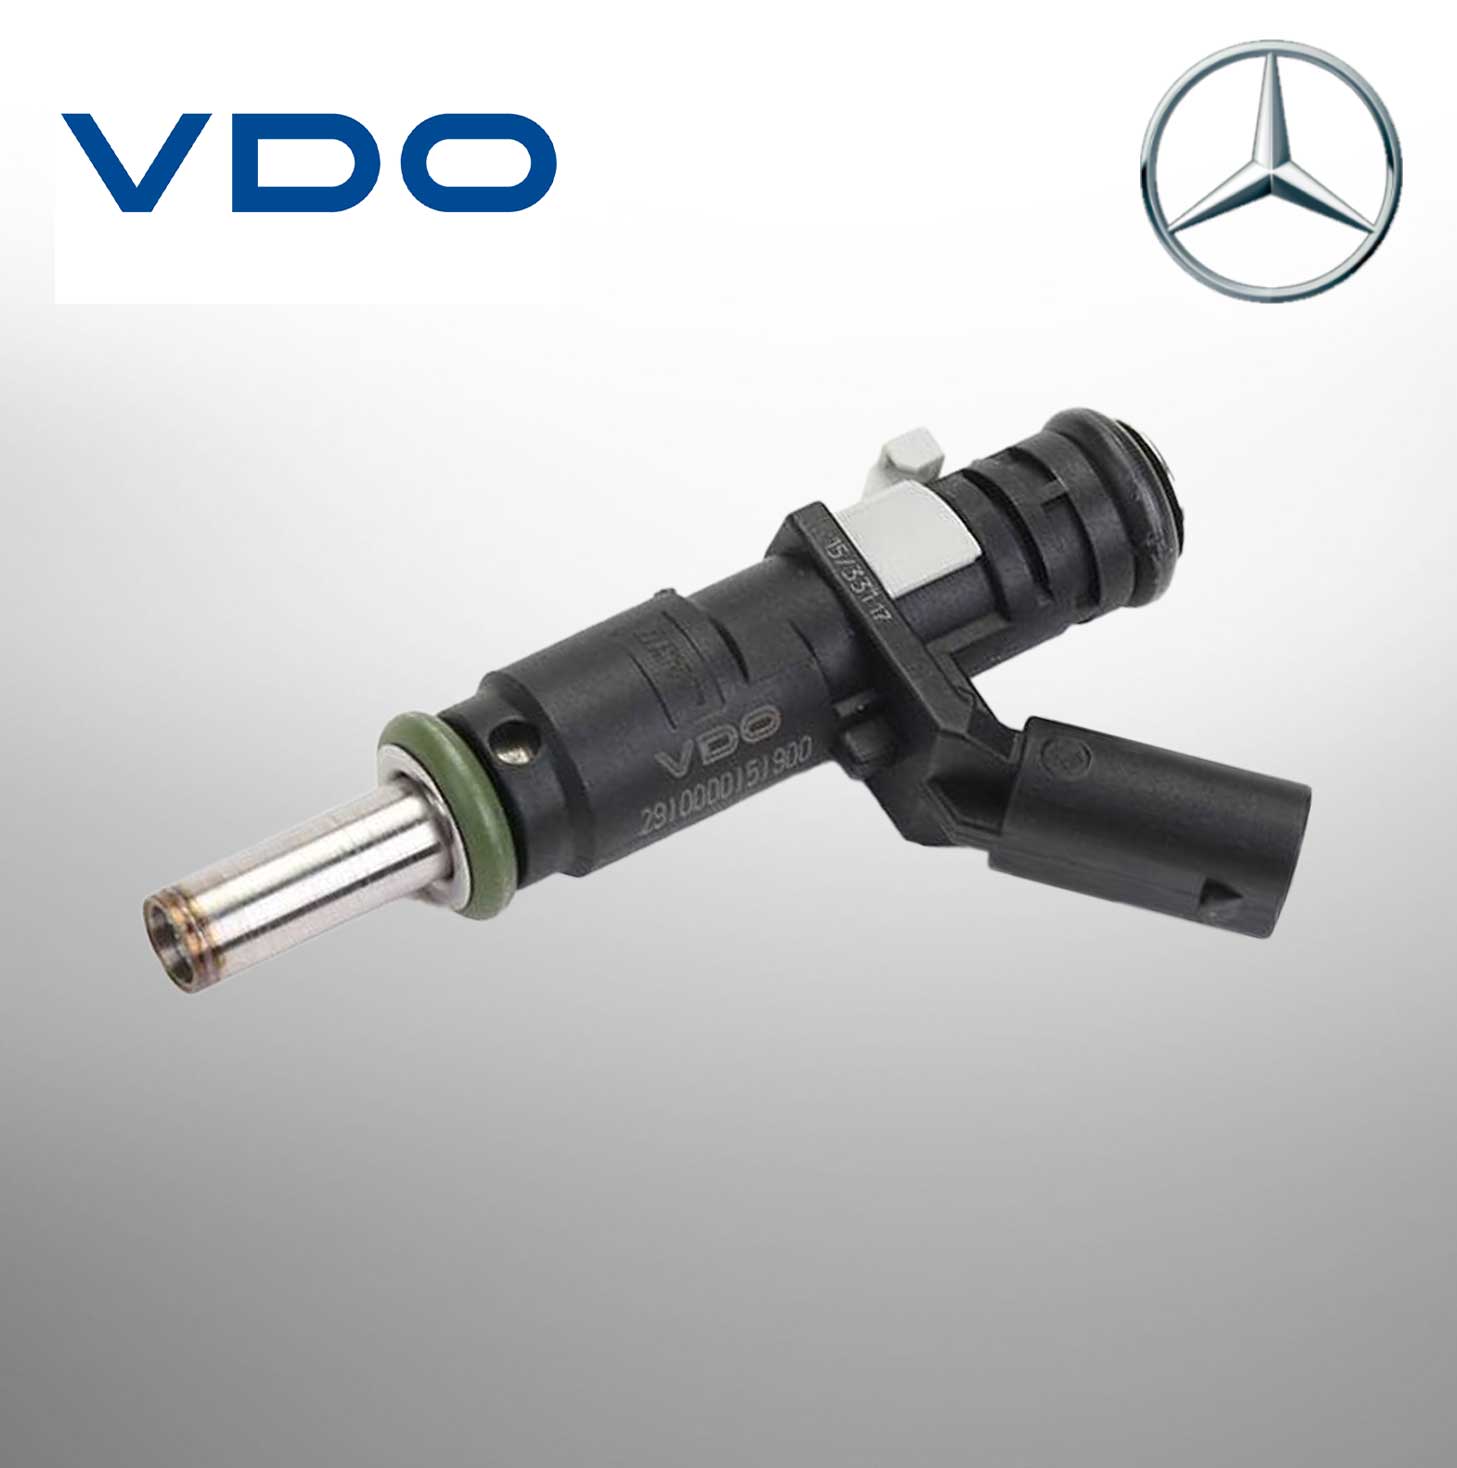 VDO INJECTOR W203/W204/212/211/164 A2910000151900 For MERCEDES BENZ 2720780249